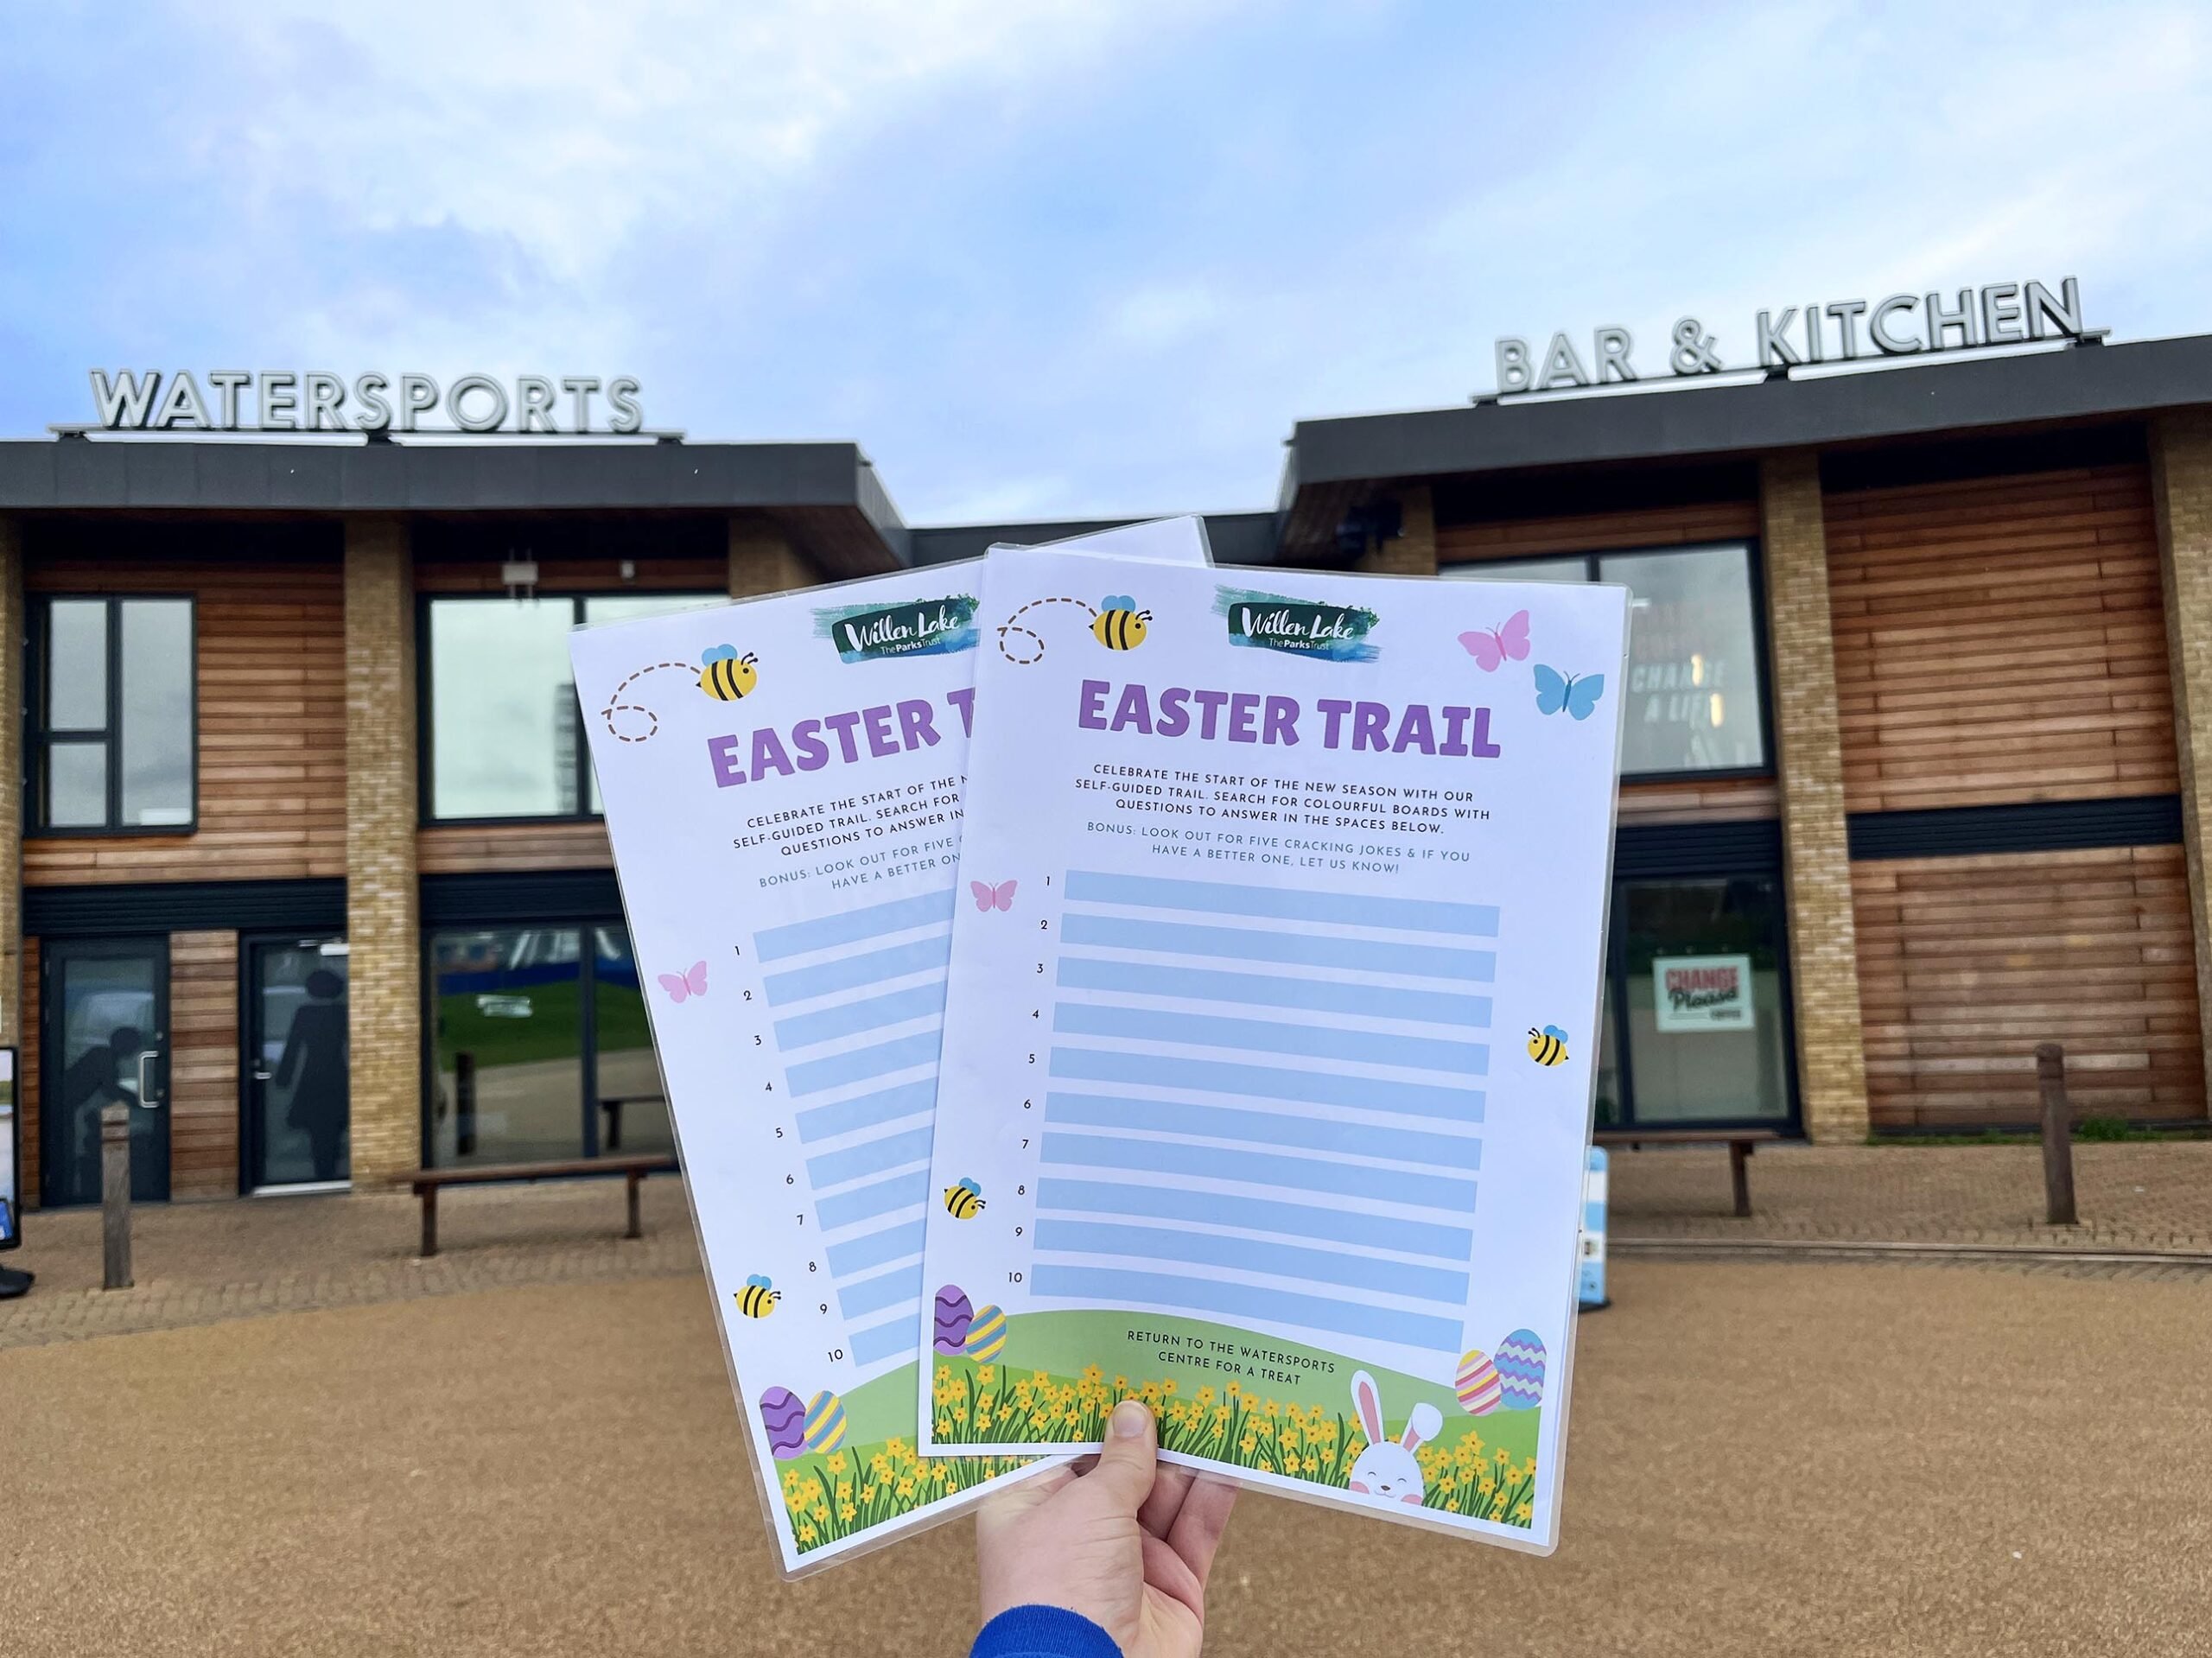 Willen Lake’s free Easter trail is back